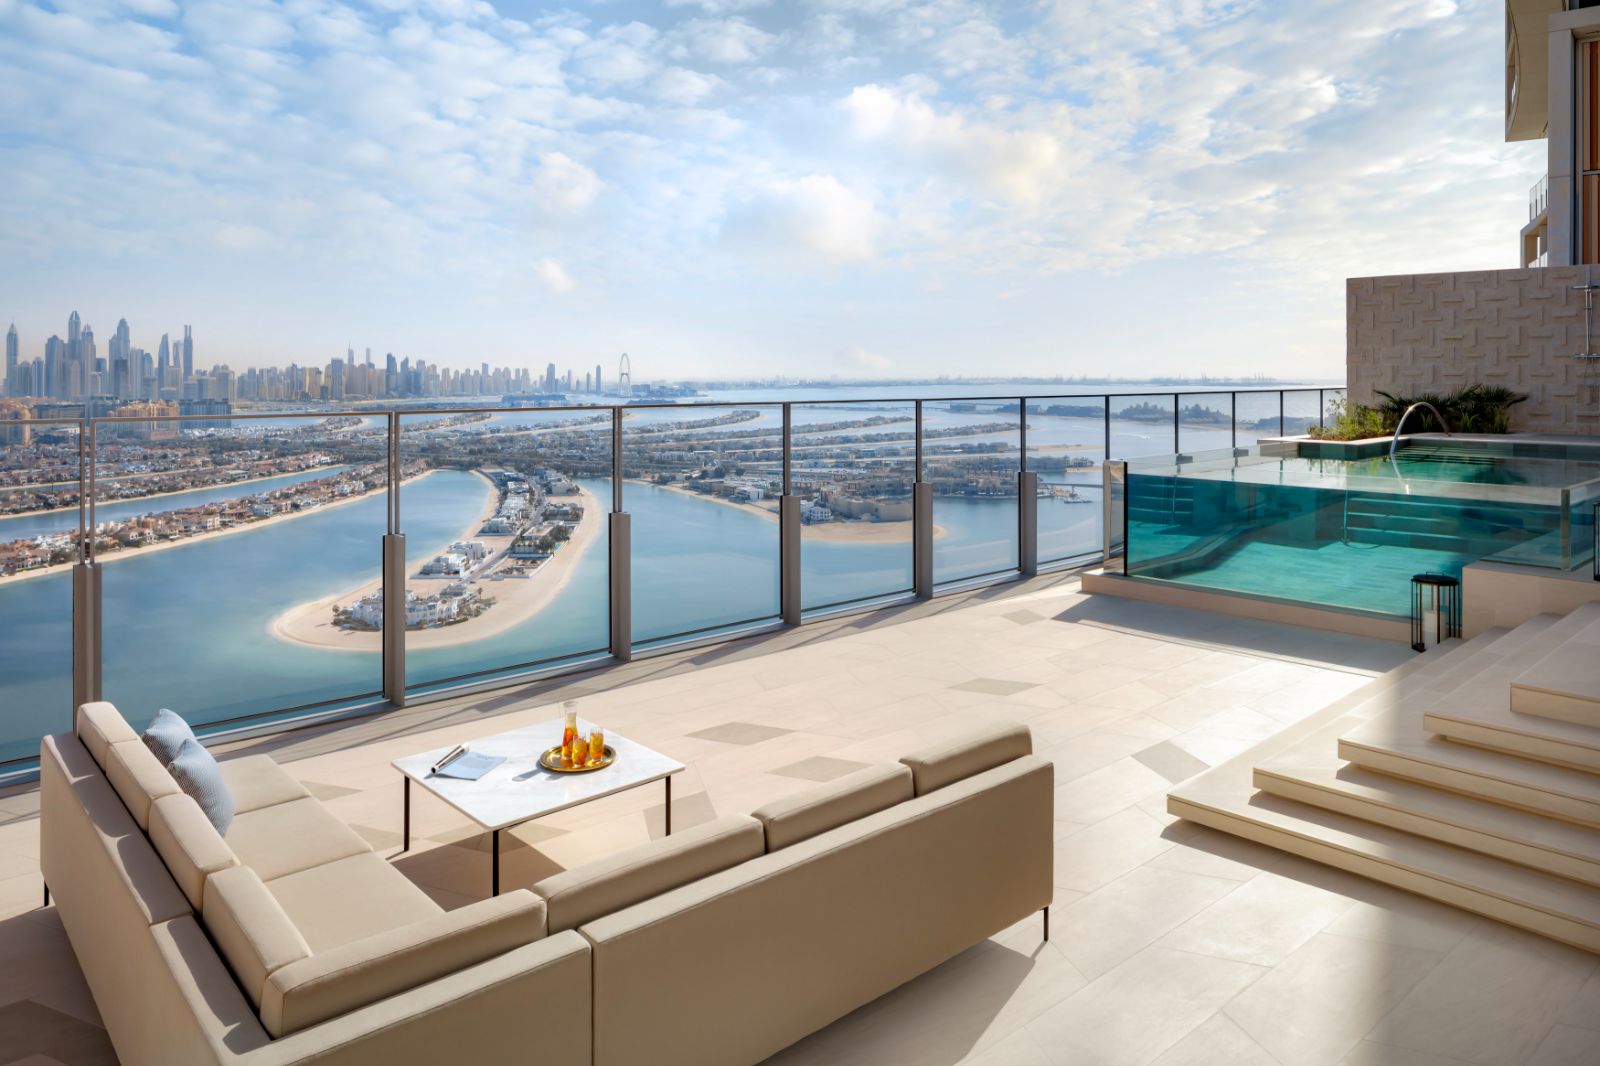 Skyscape suite terrace at Atlantis The Royal on the Palm Jumeirah in Dubai